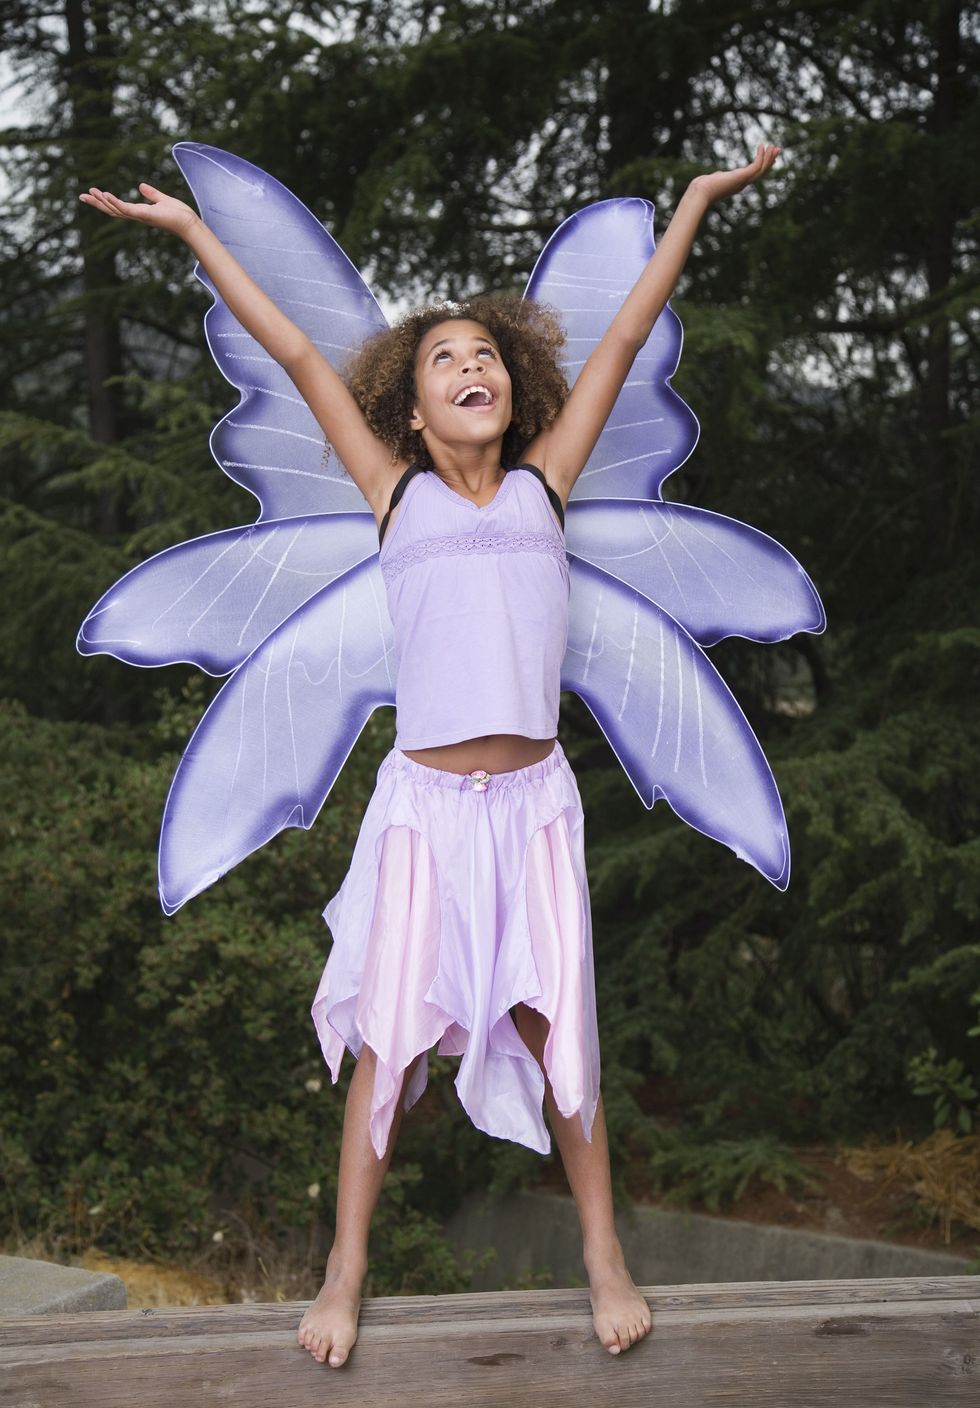 girl, about 11 or 12 years old, wearing fairy halloween costume for tweens with pale purple wings, tank top and flowy skirt